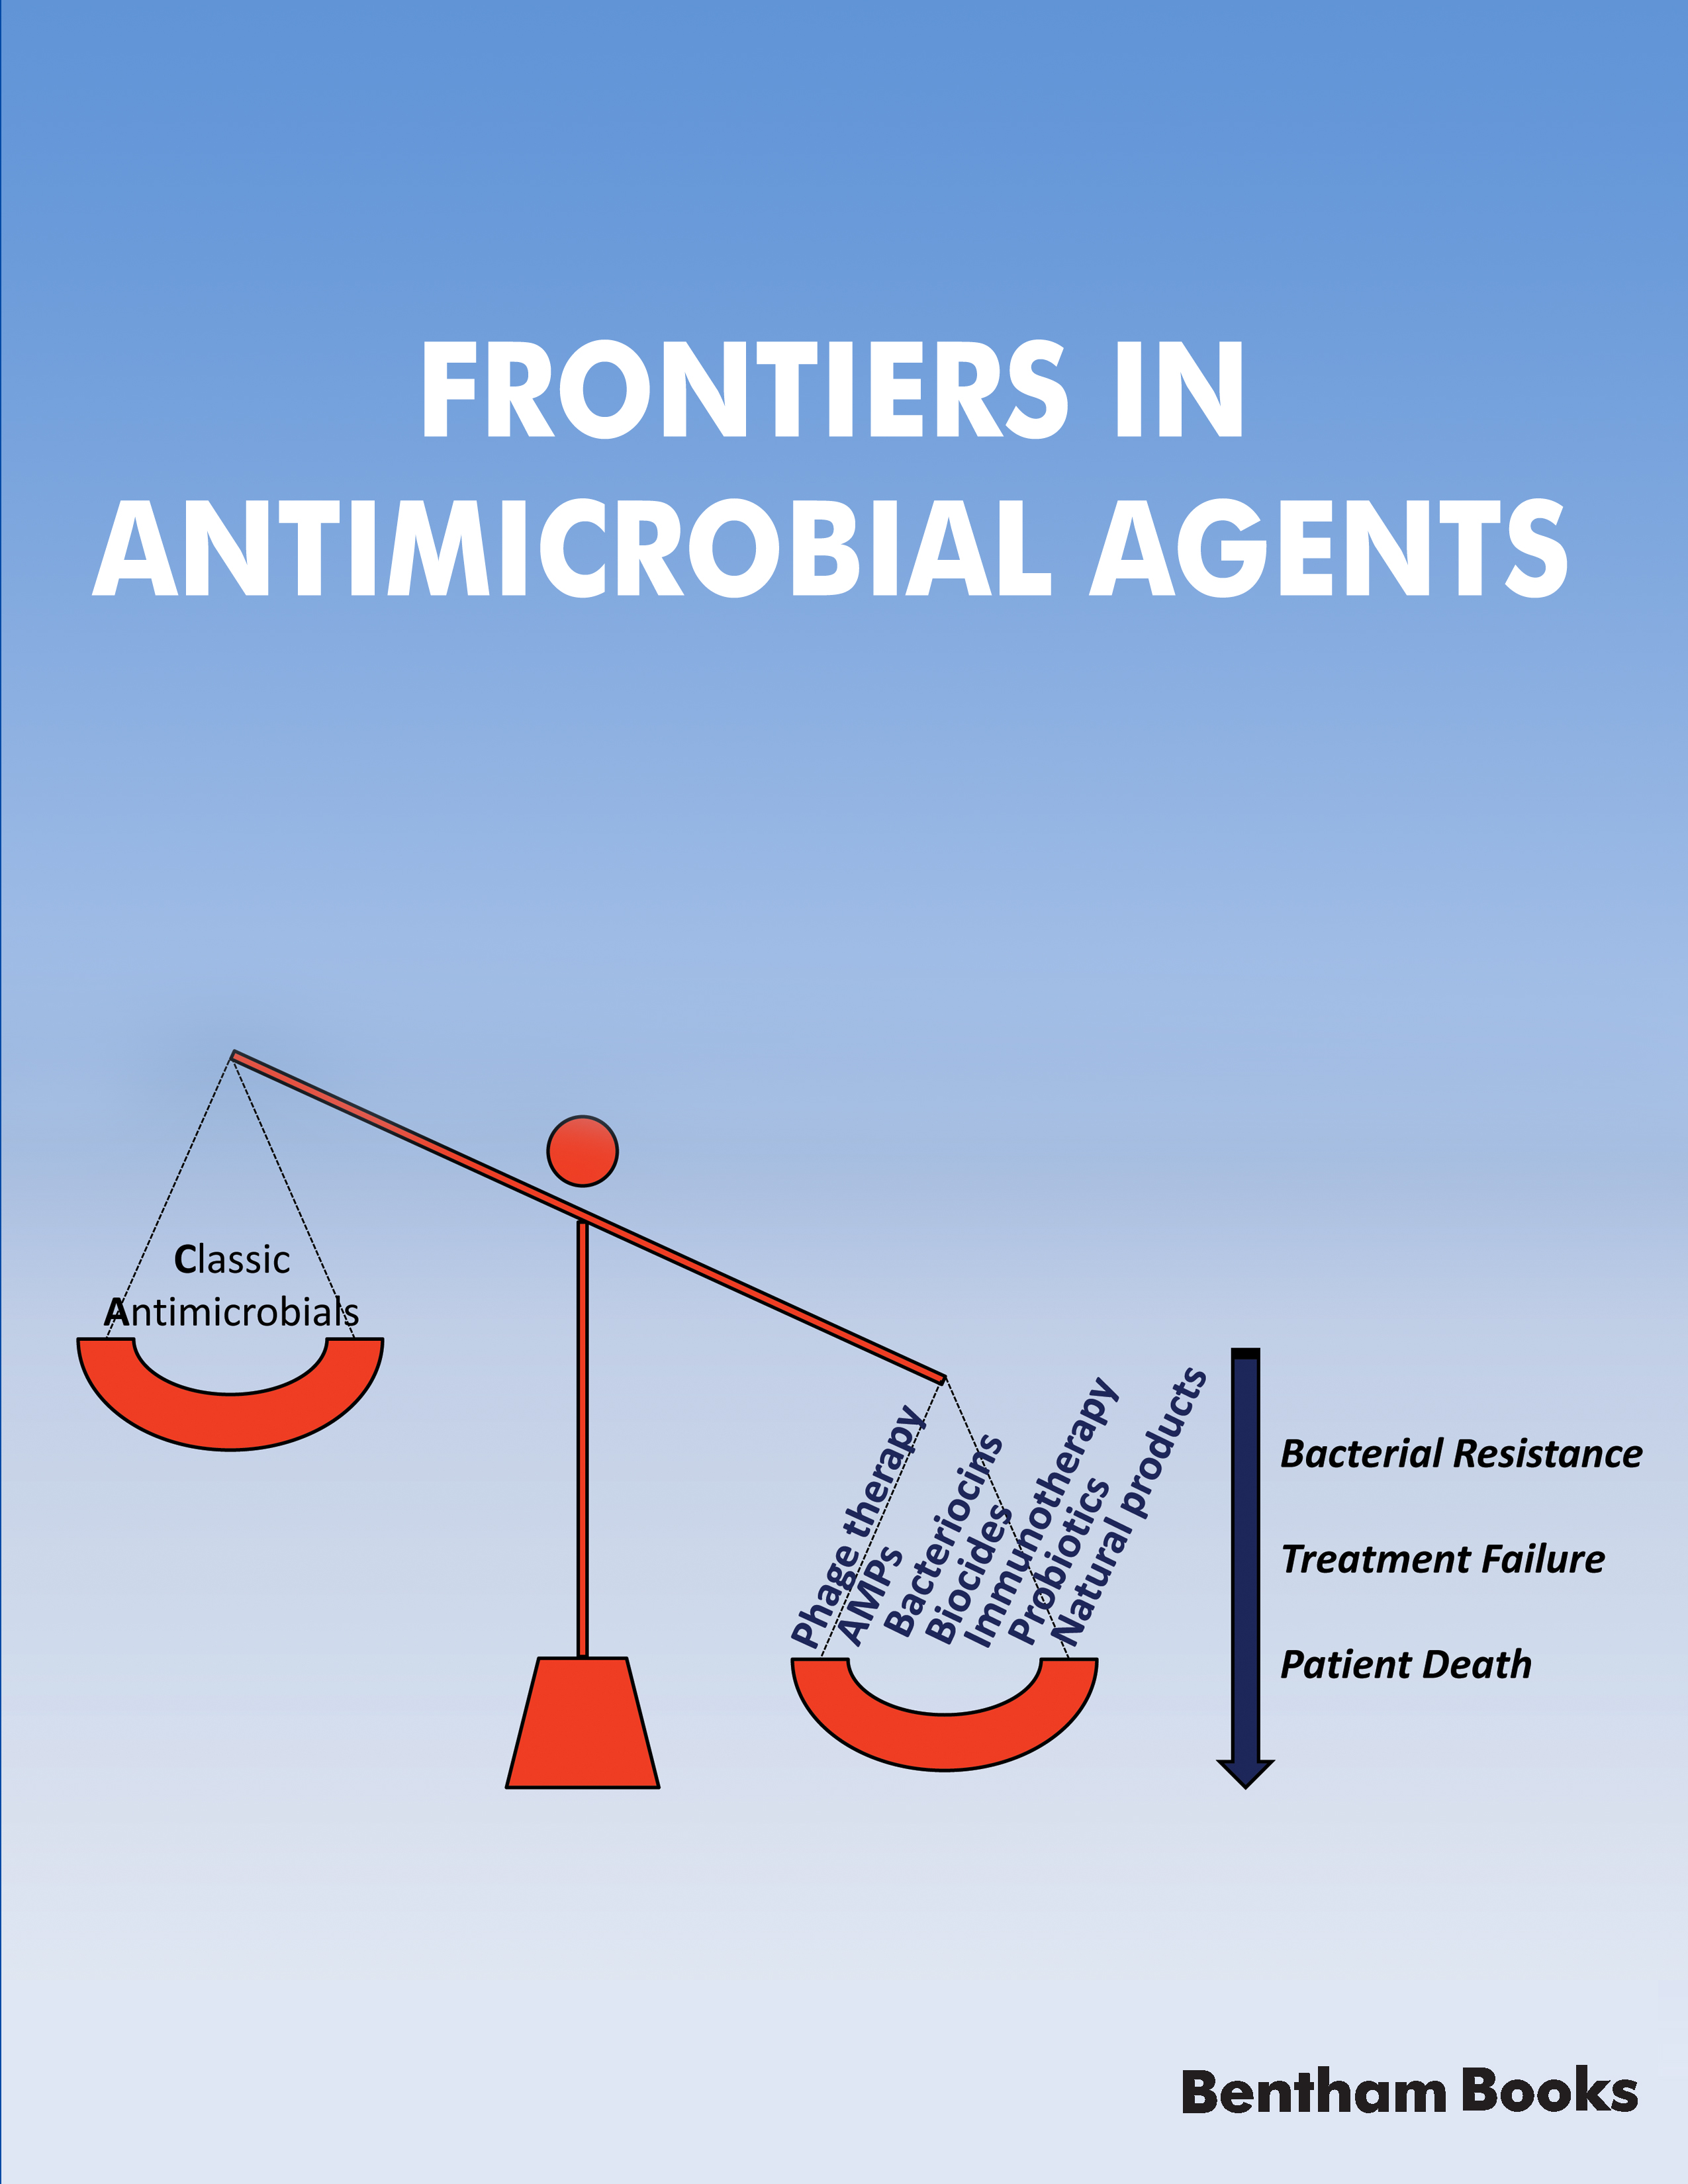 Frontiers in Antimicrobial Agents